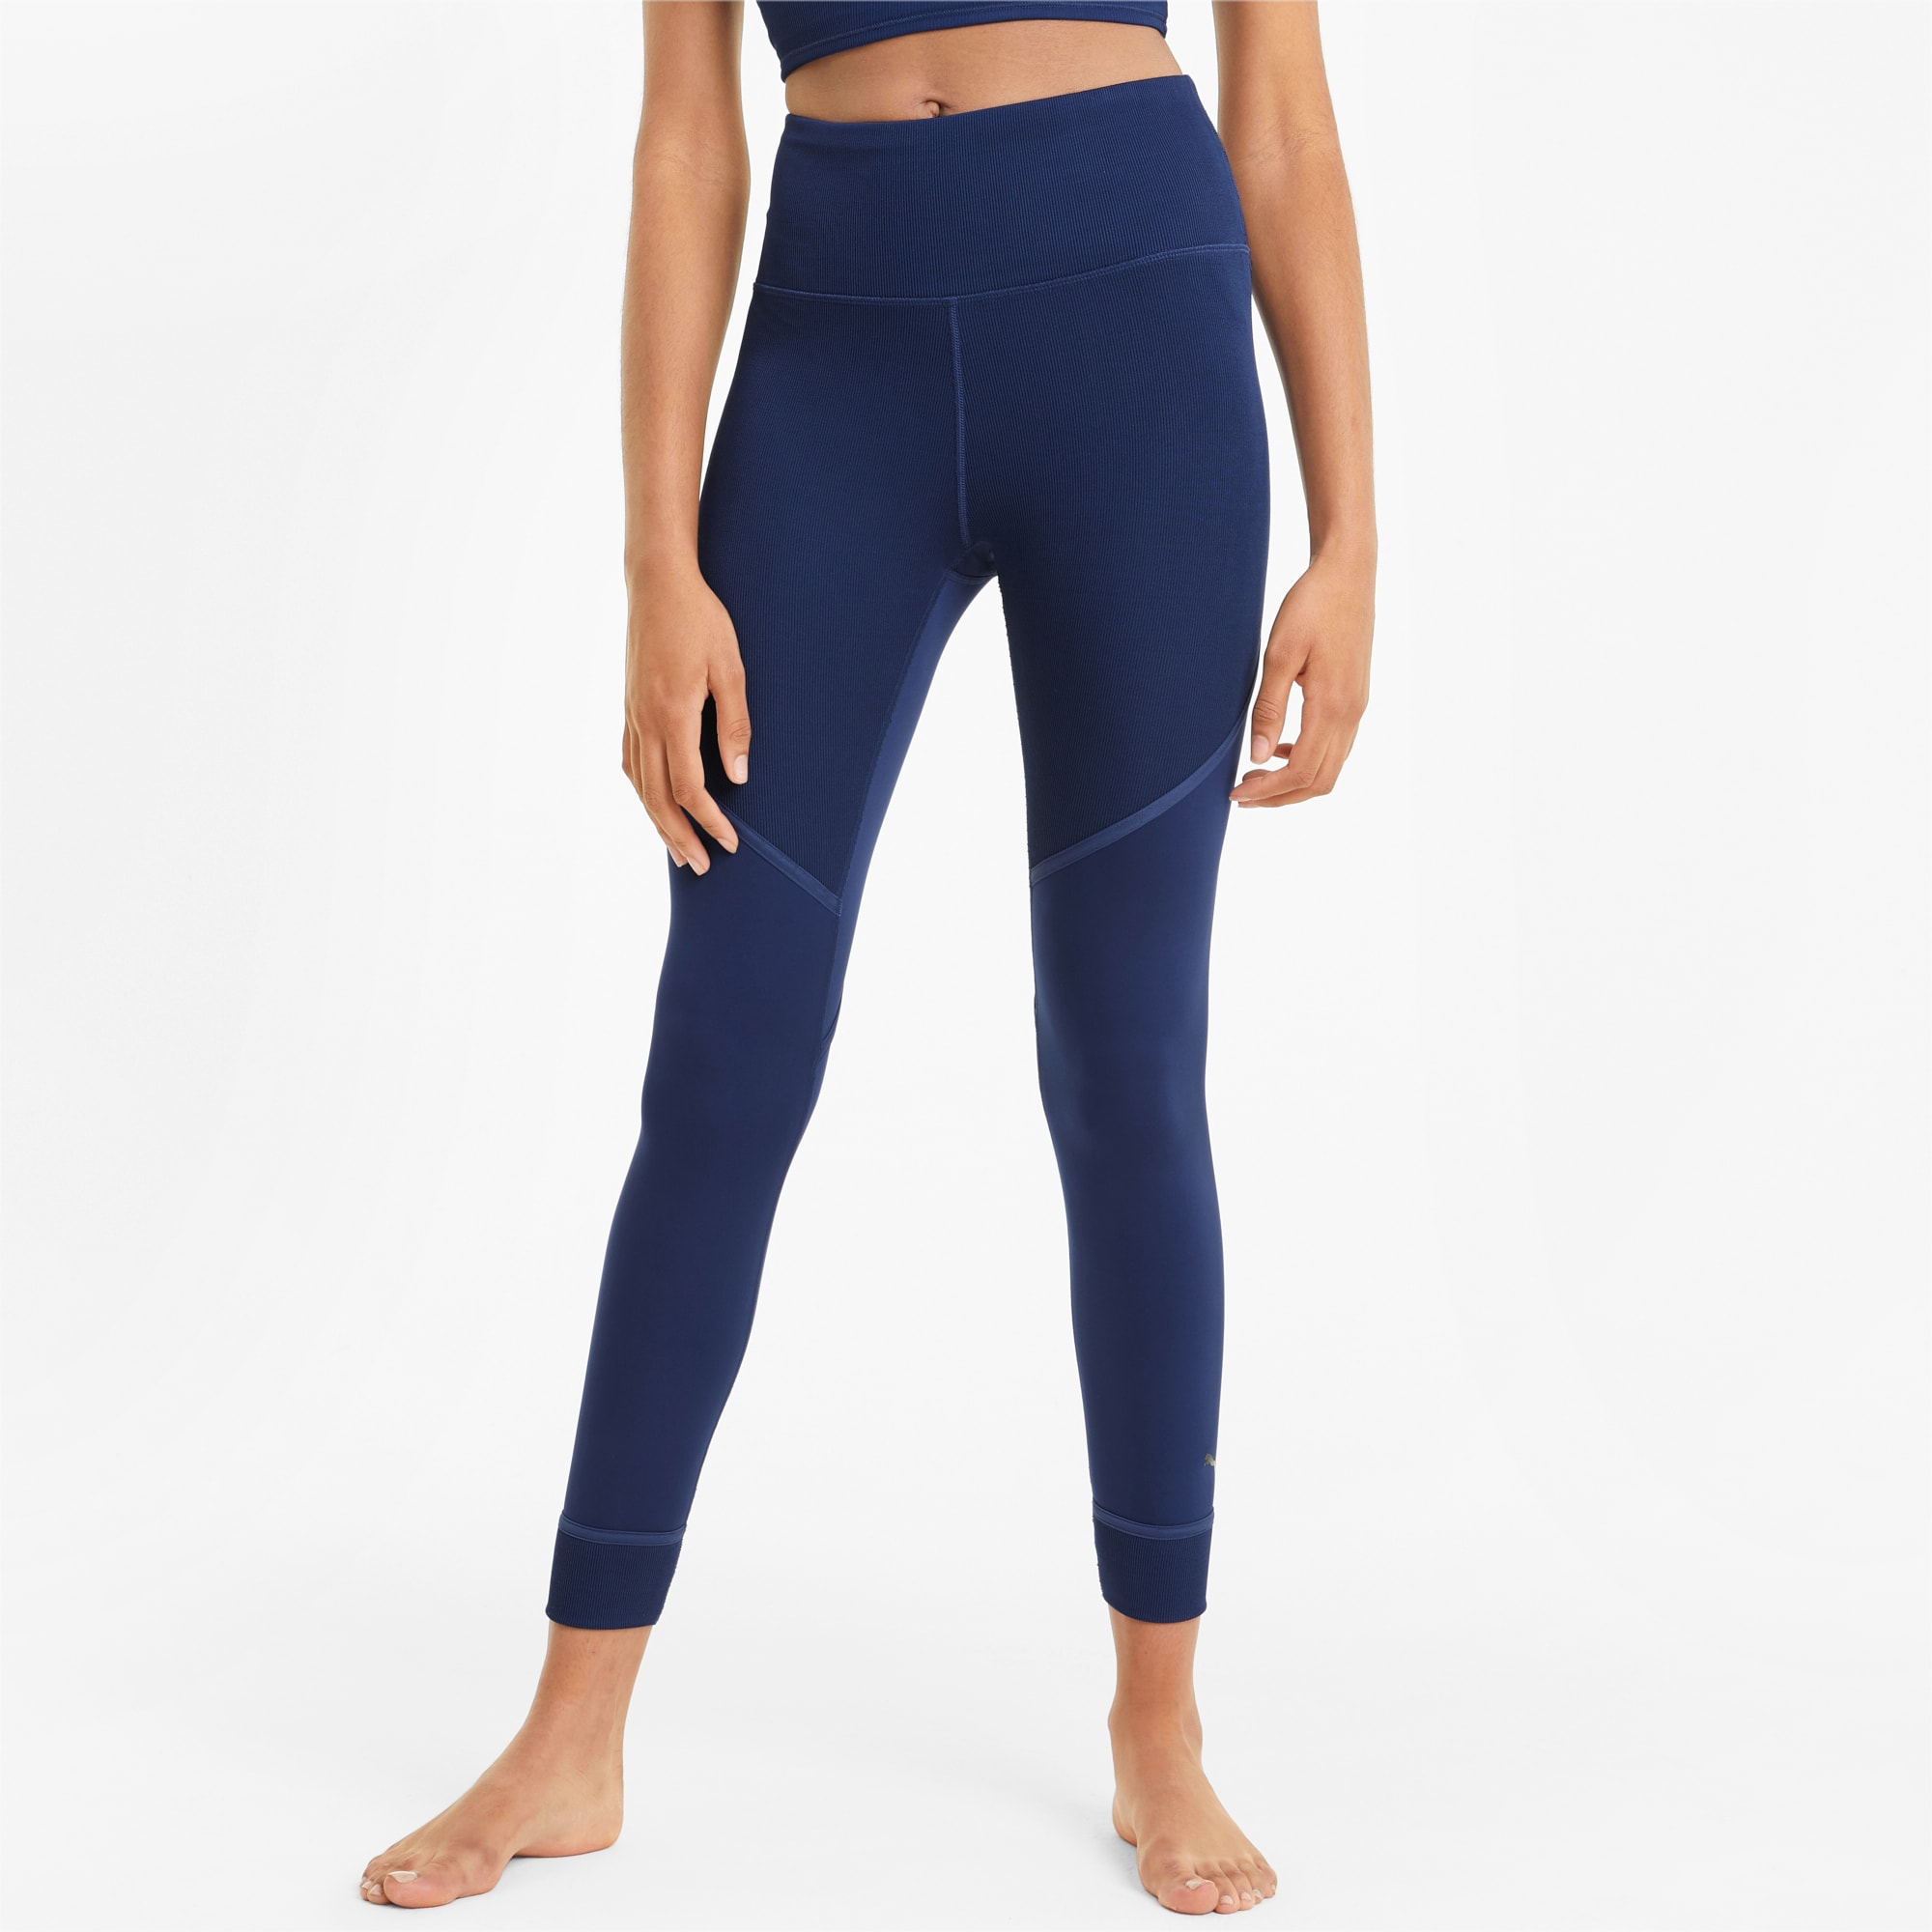 Puma Studio Granola sculpted leggings with v-waistband in muted